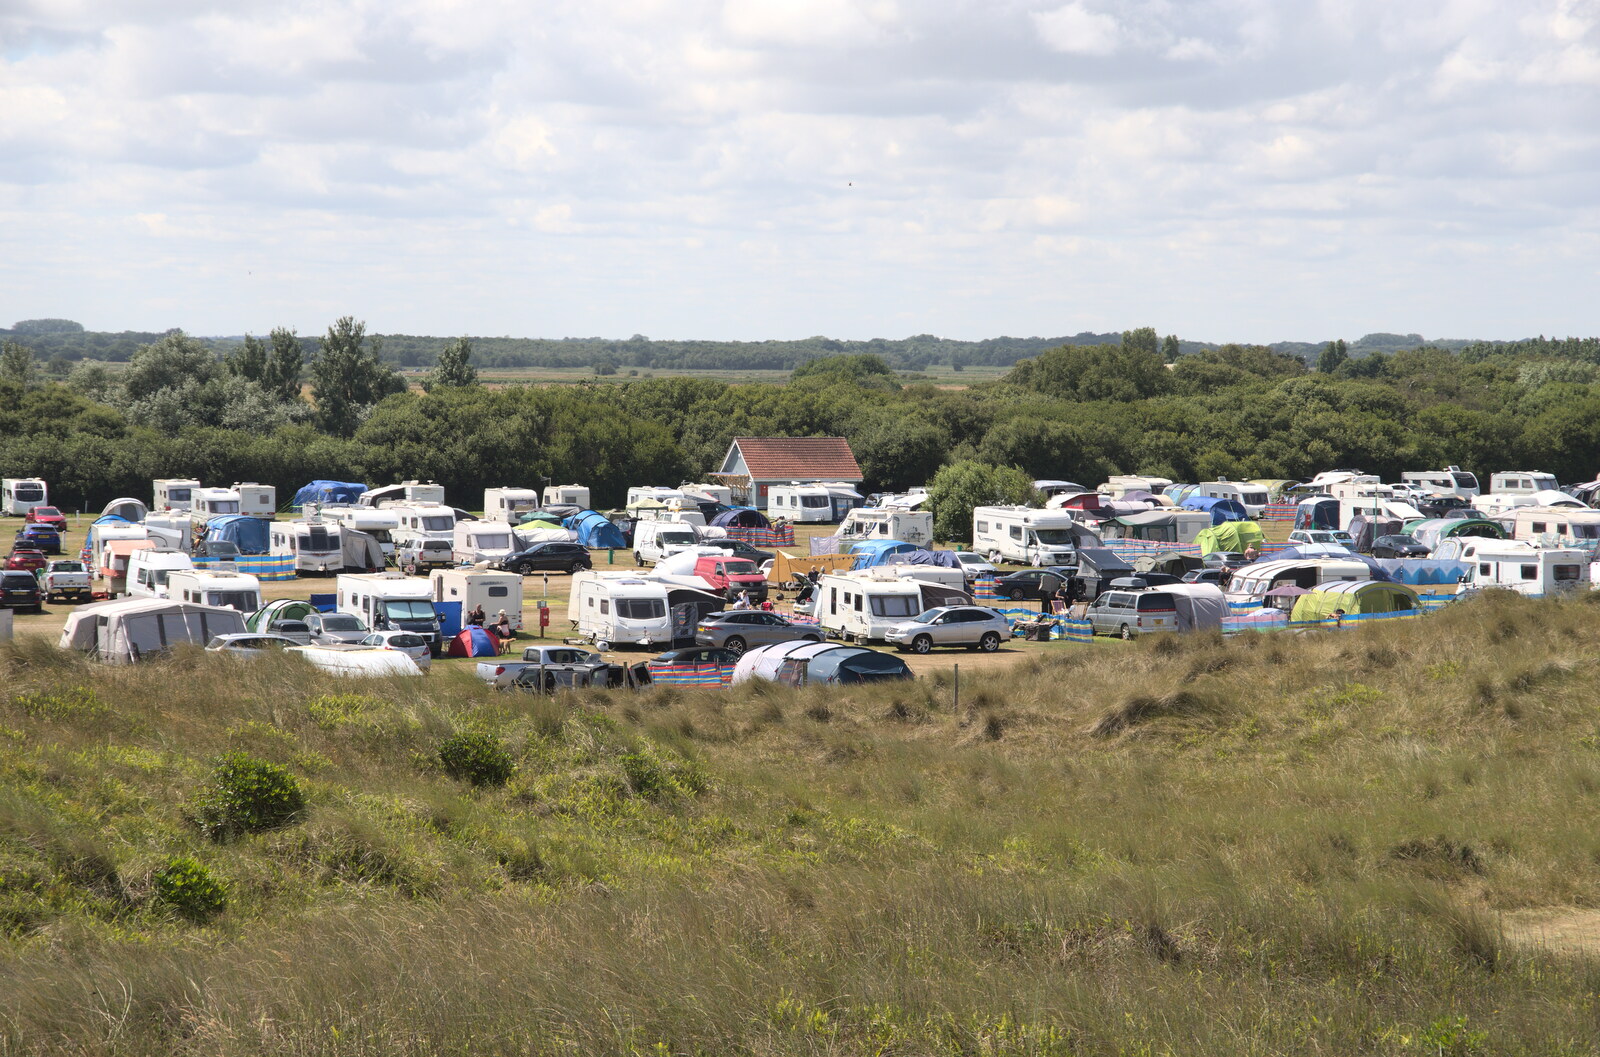 The campsite is heaving again from Camping in the Dunes, Waxham Sands, Norfolk - 9th July 2022